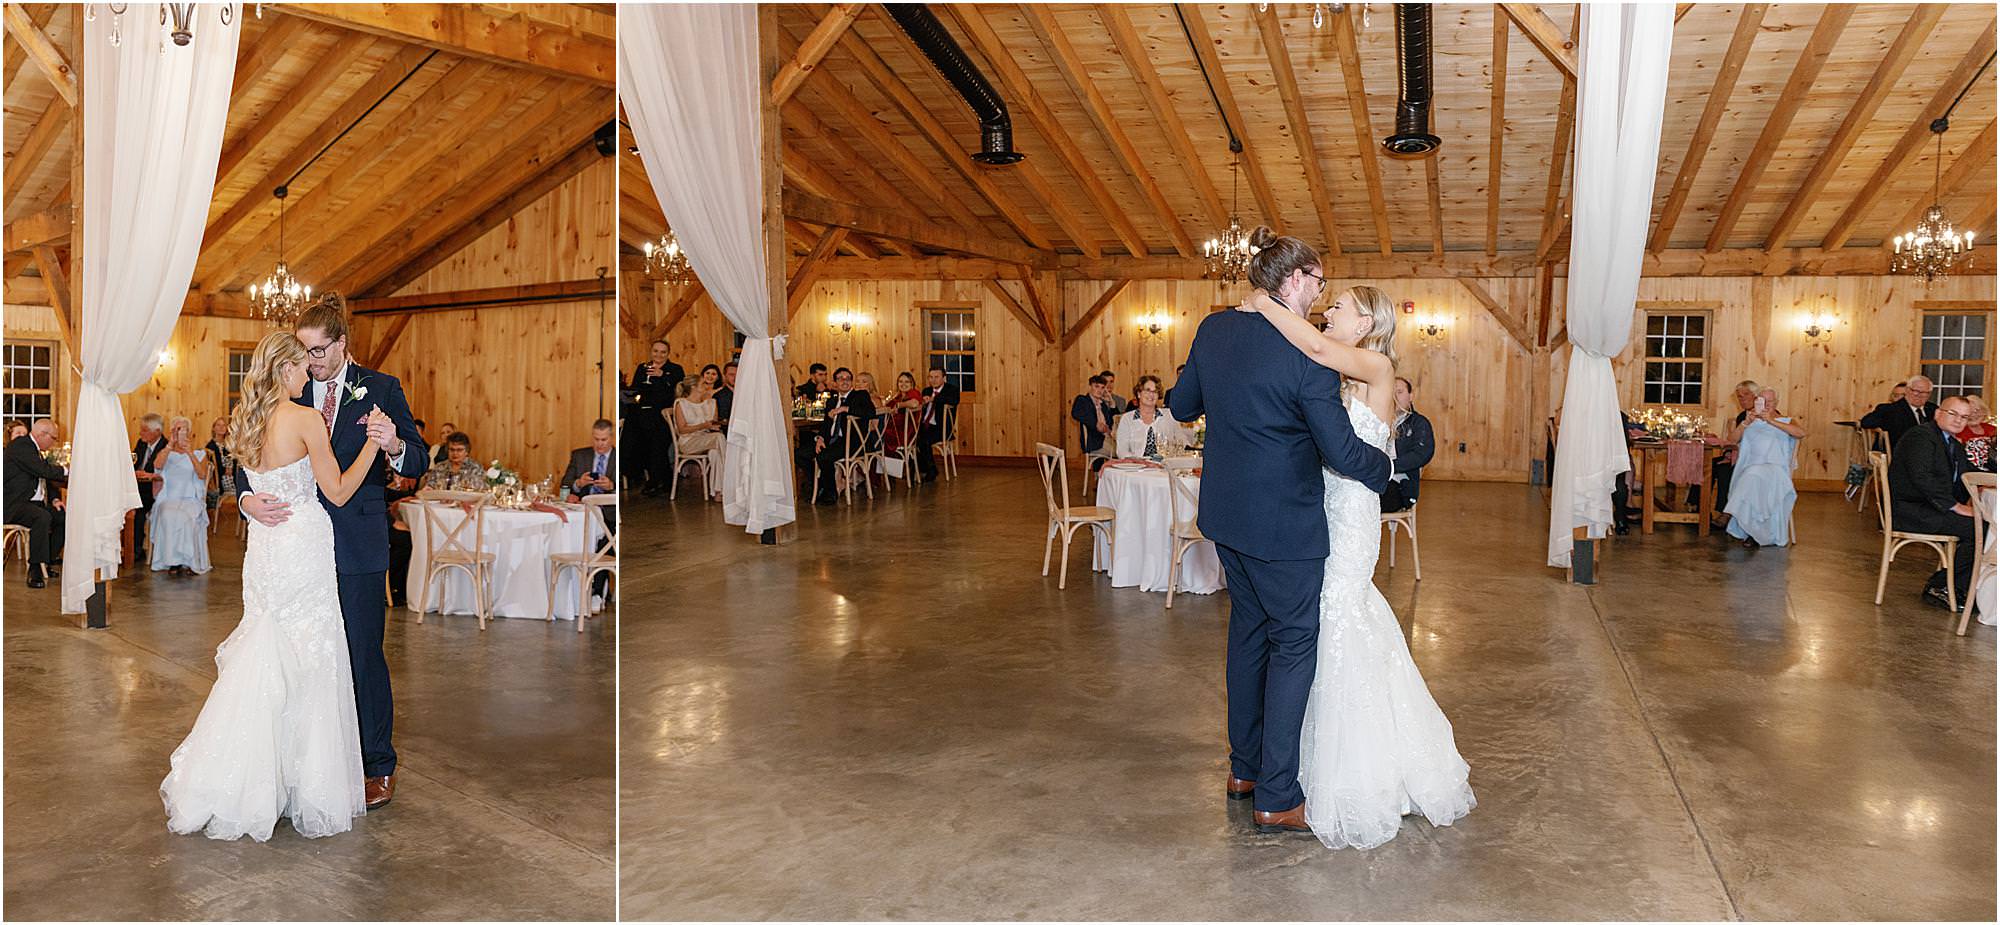 Couple having their first dance at barn venue in Connecticut